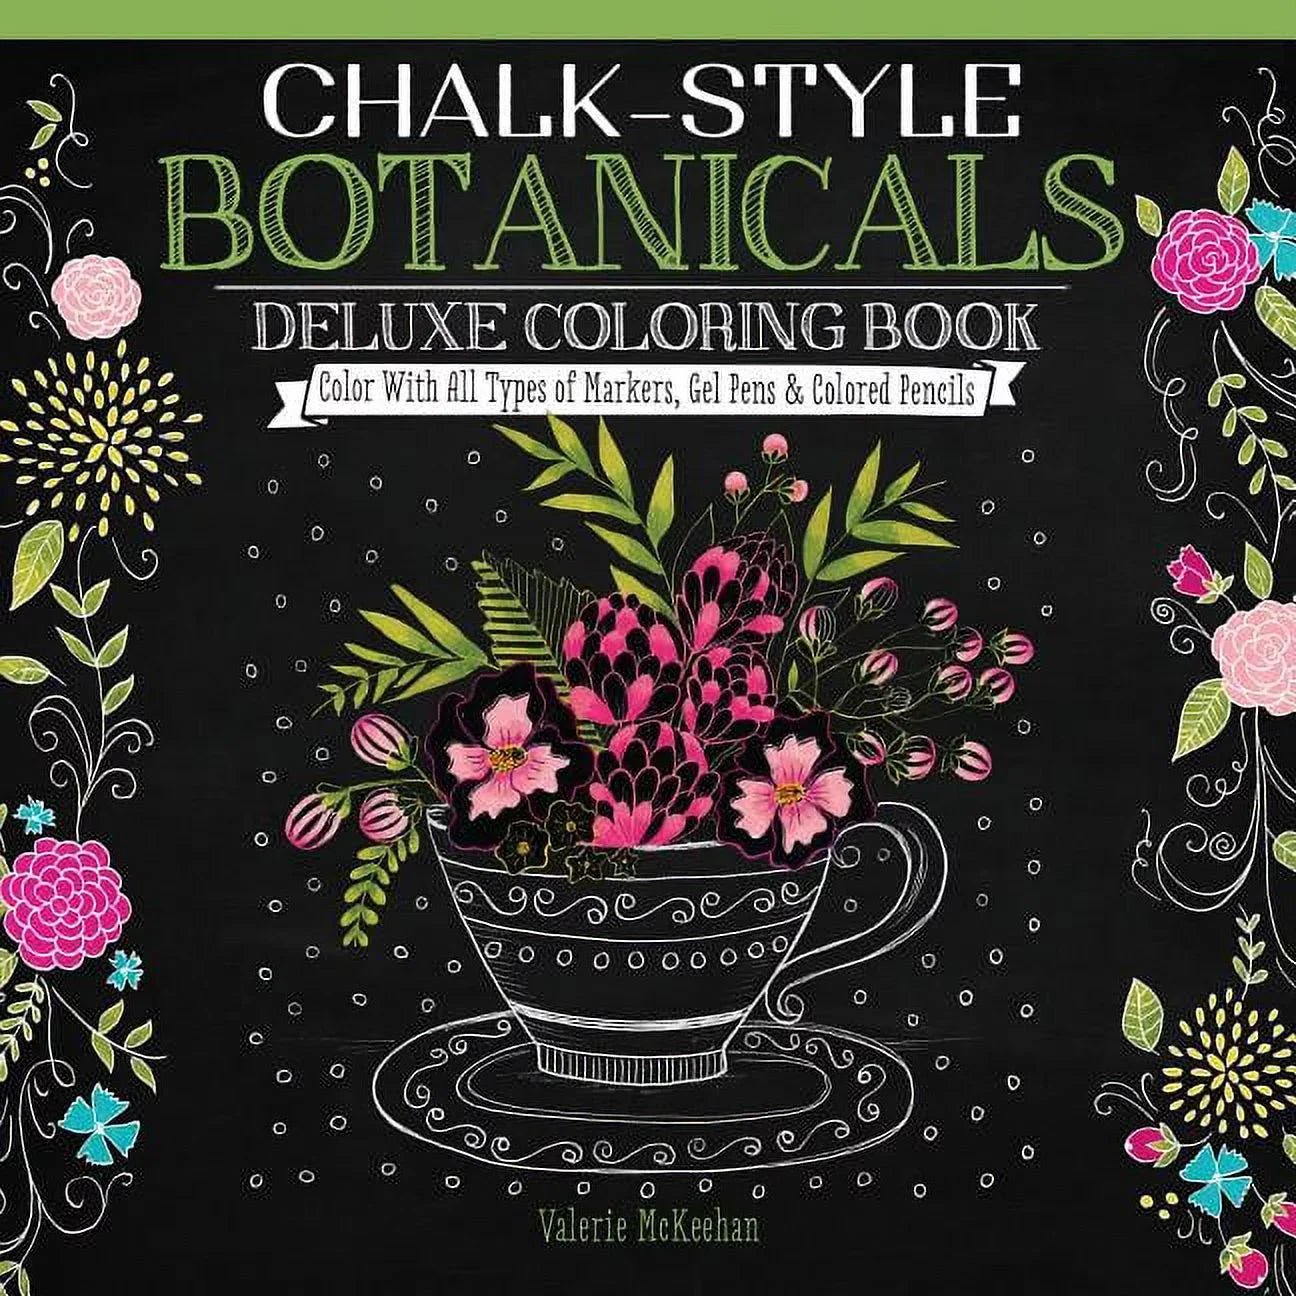 Wholesale prices with free shipping all over United States Chalk-Style Botanicals Deluxe Coloring Book: Color With All Types of Markers, Gel Pens Colored Pencils - Steven Deals